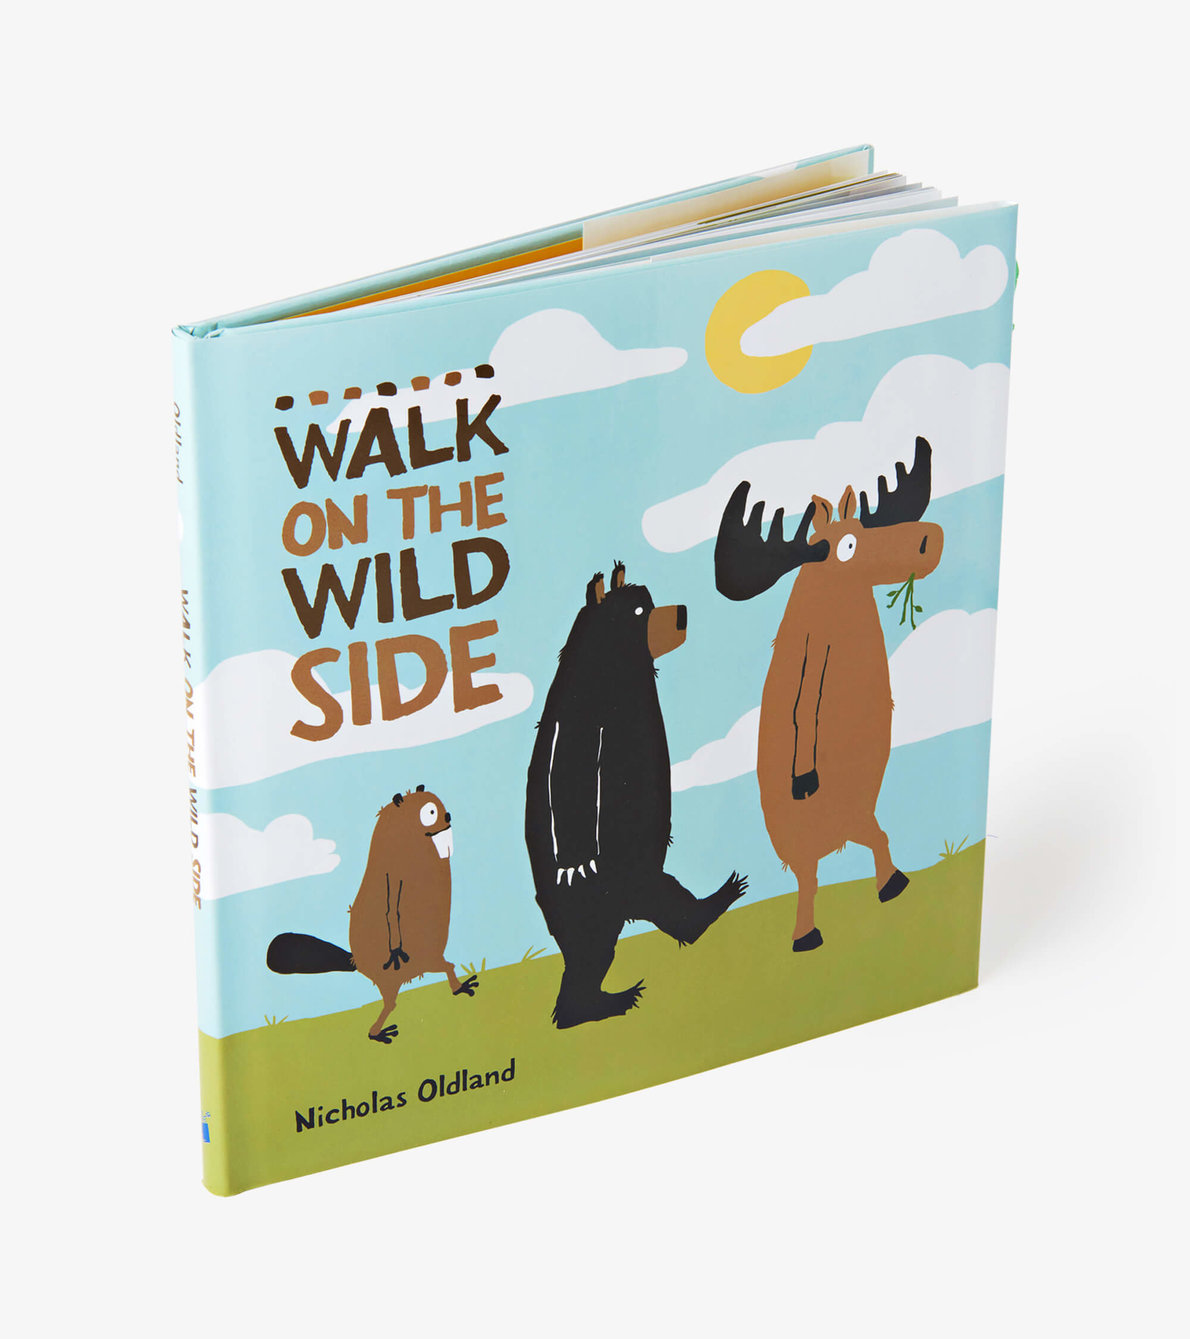 View larger image of "A Walk on The Wild Side" Children's Book